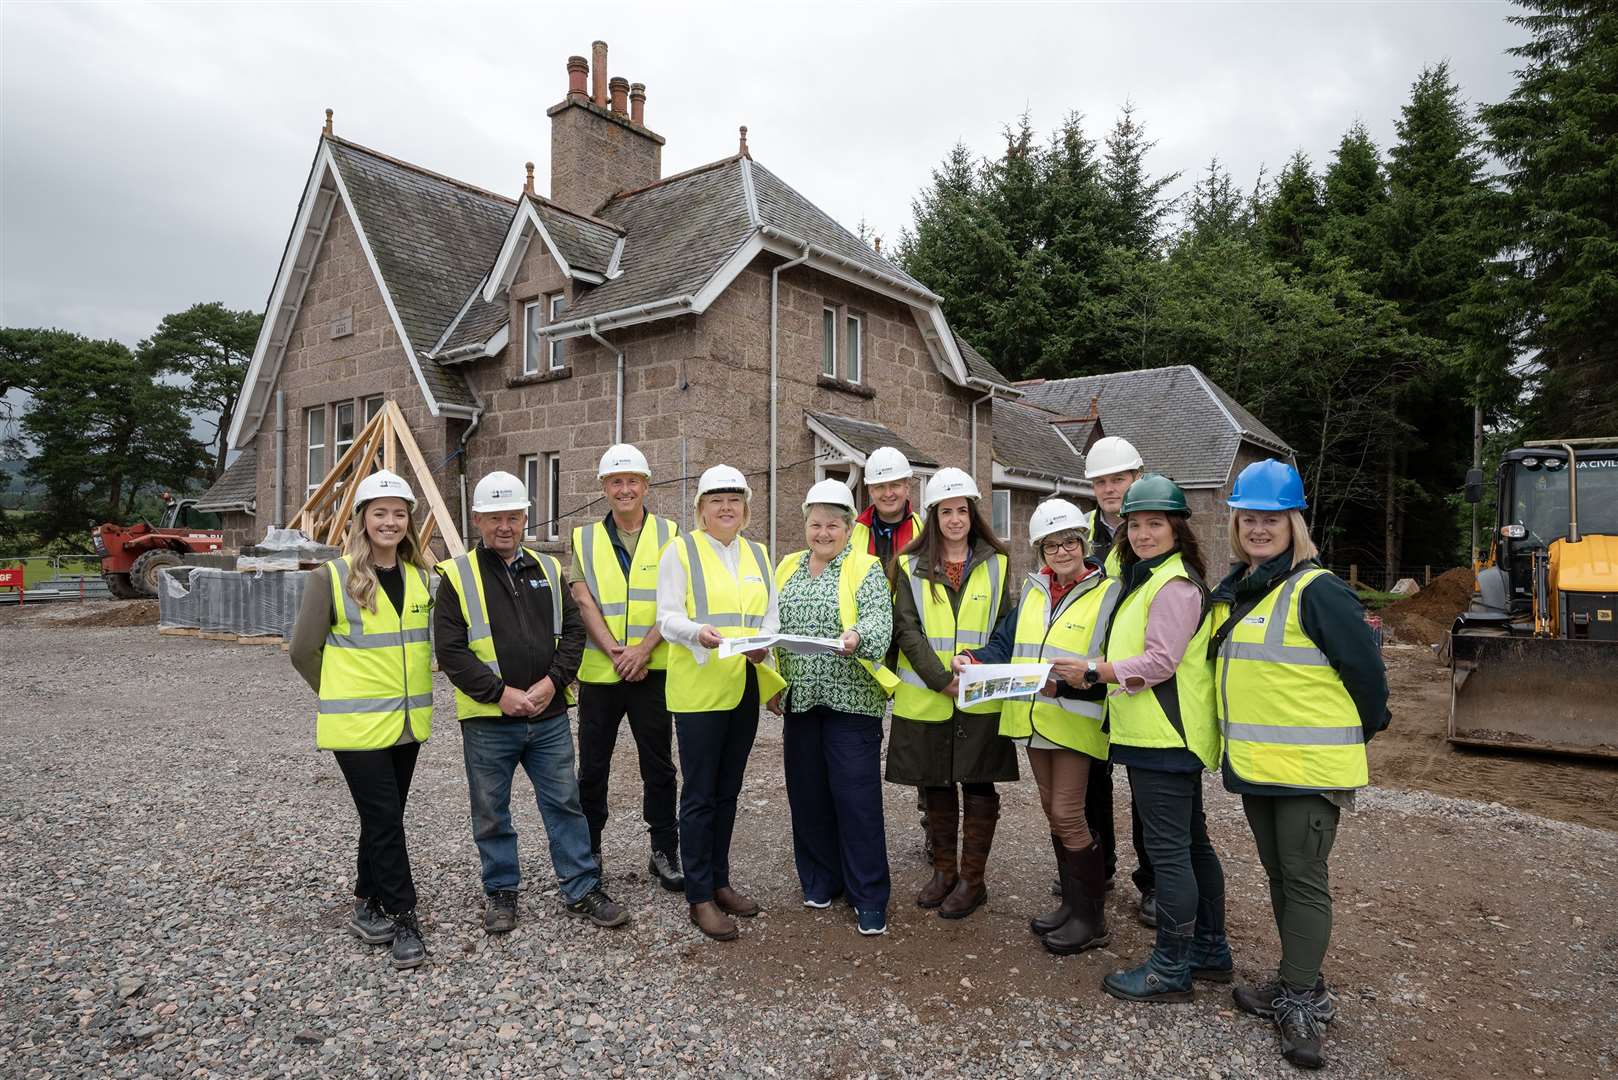 At the visit were (left) Lucy McDonald Quantity Surveyor for Burns Construction, Robbie Copland site foreman for Burns Construction, Niall Ritchie Outdoor Activity Officer, Provost Judy Whyte, Councillor Anne Stirling, Malcolm Grant Outdoor Activity Officer, Councillor Hannah Powell, Avril Nicol Head of Service, Scott Warrander Council Architect, Susi McLarty Live Life Outdoors Team leader and Rachel Boal Outdoor Activity Officer.